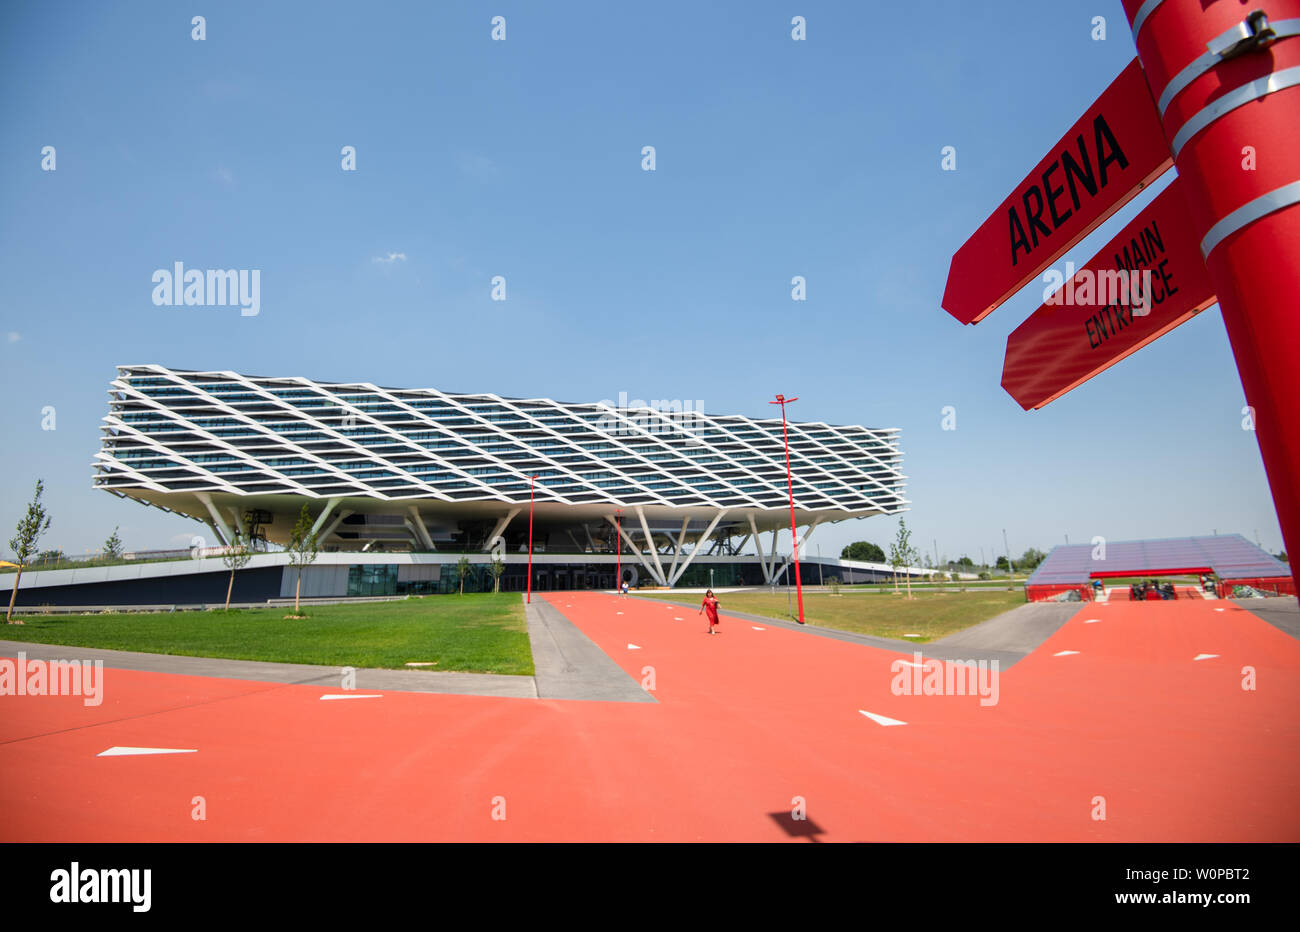 Herzogenaurach, Germany. 26th June, 2019. Adidas campus. In the year of its existence, the sporting goods manufacturer moved into the new campus and the main building, the "Arena", built like